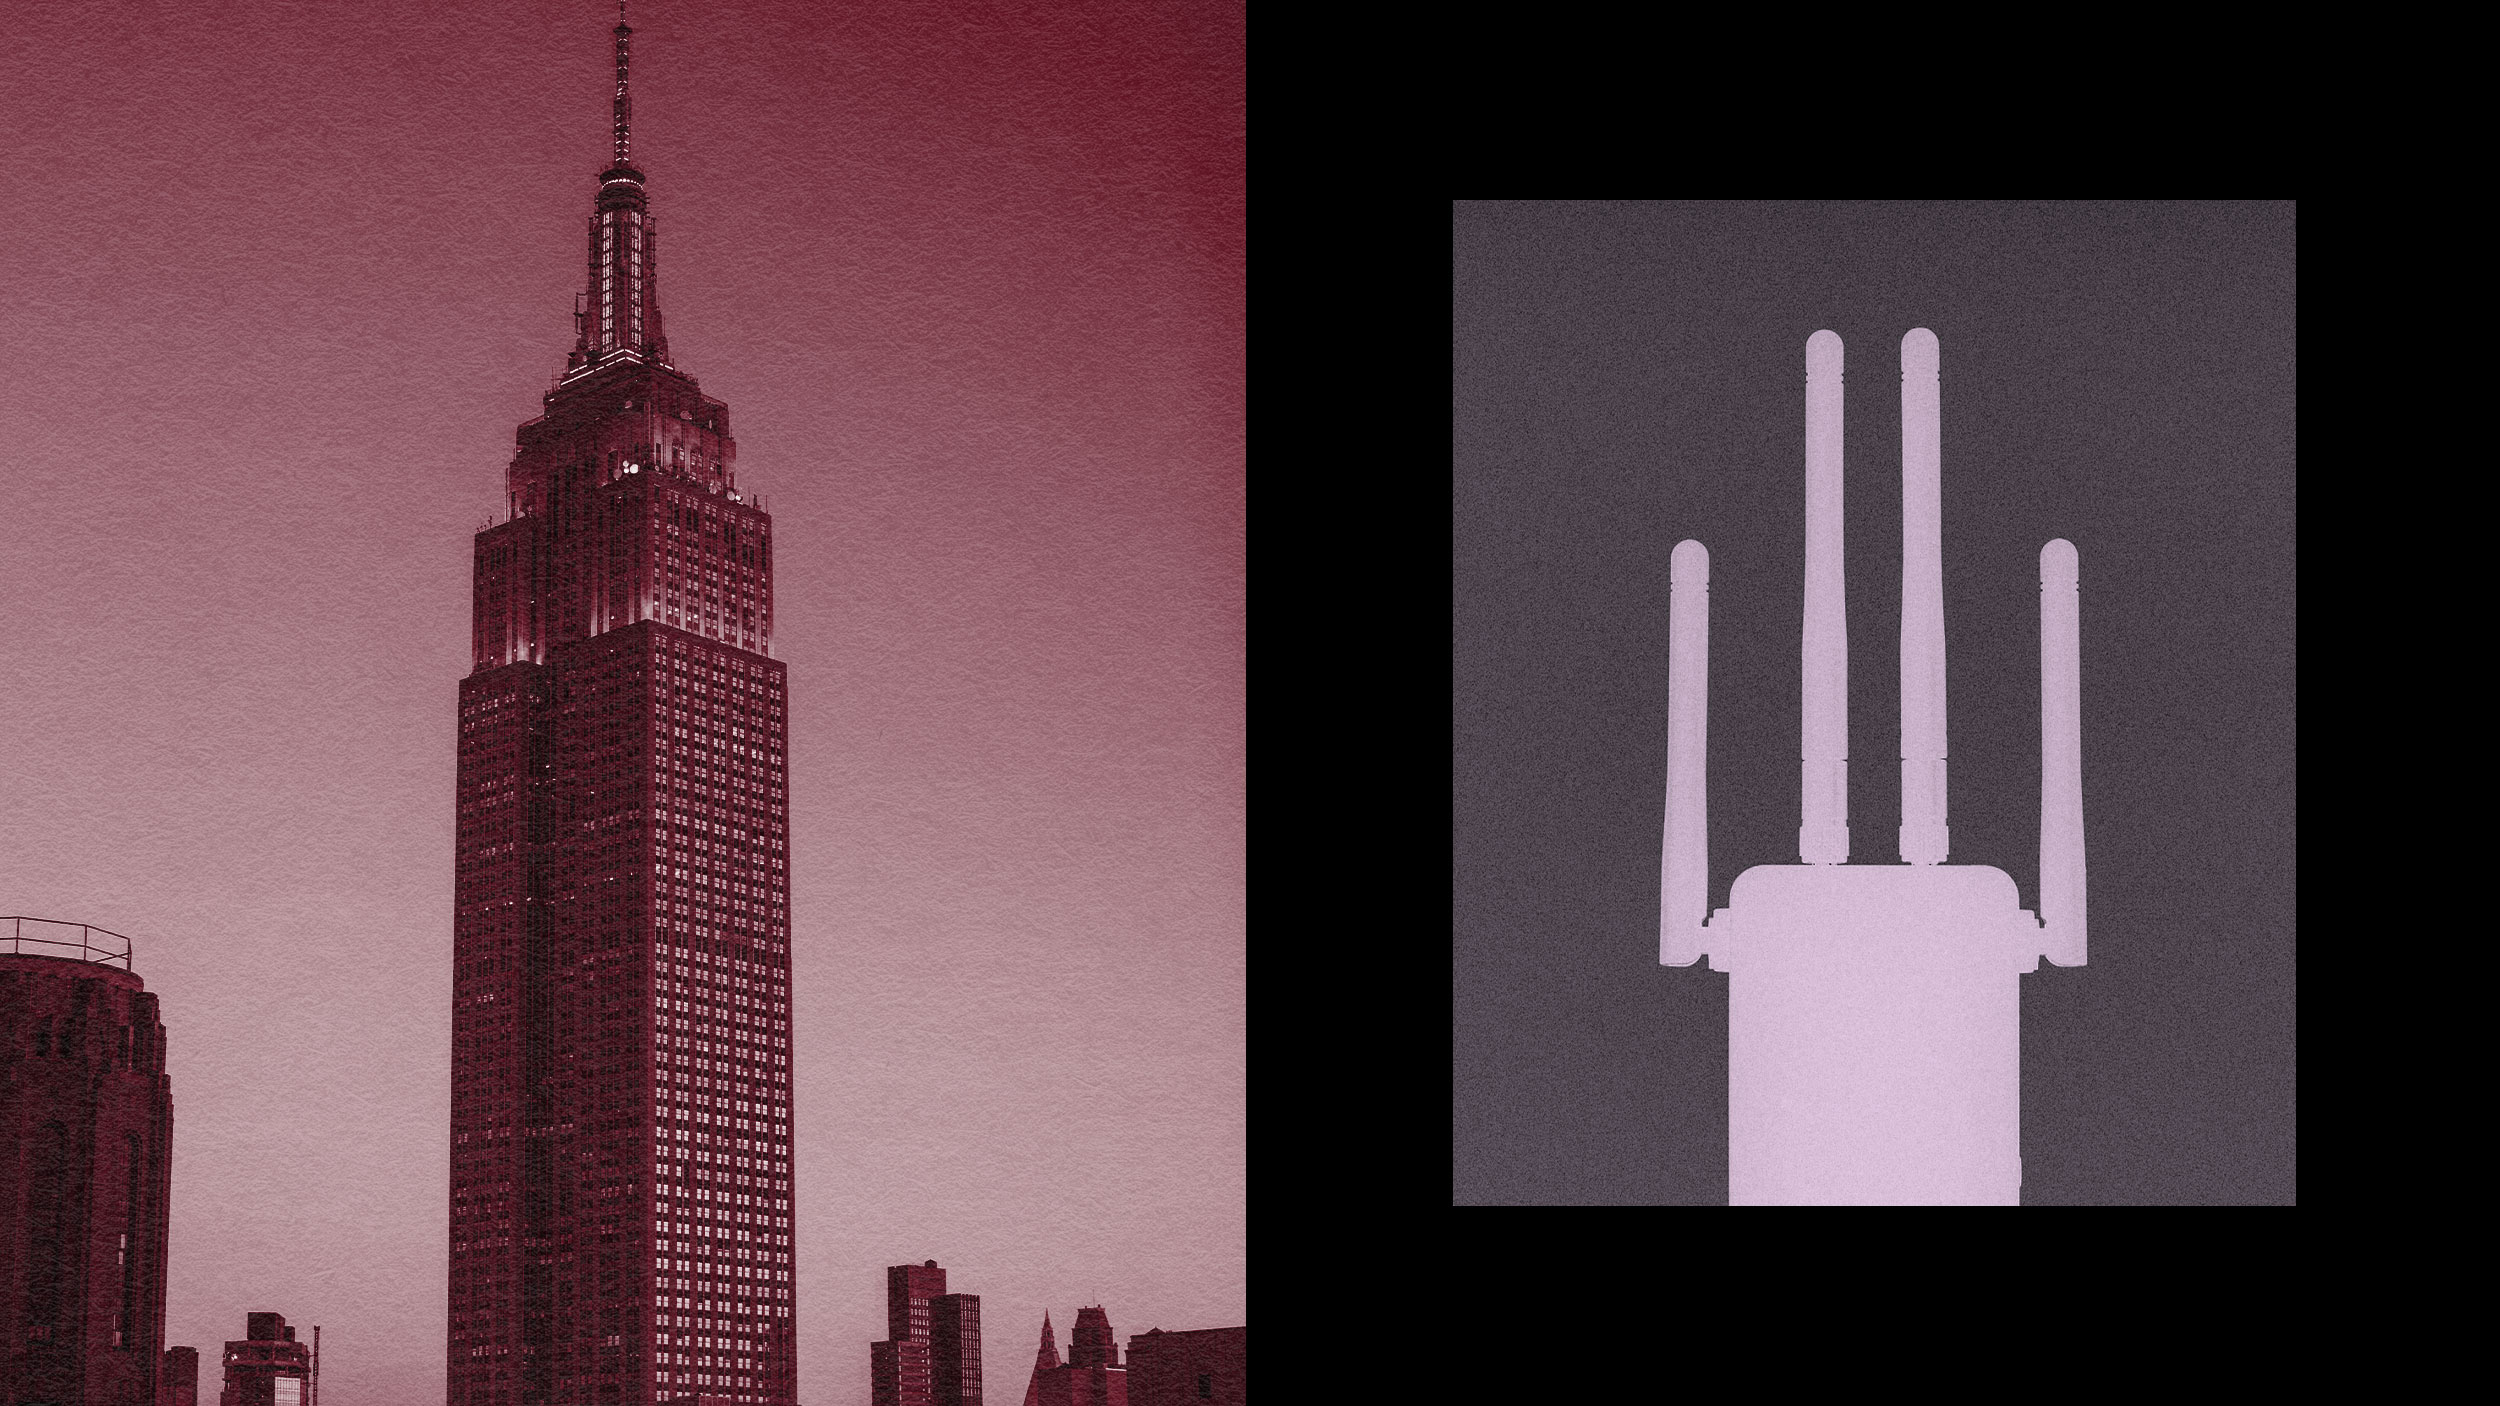 Split image with the empire state building on the left and a stylized graphic of a wi-fi router on the right, both against a purple background.